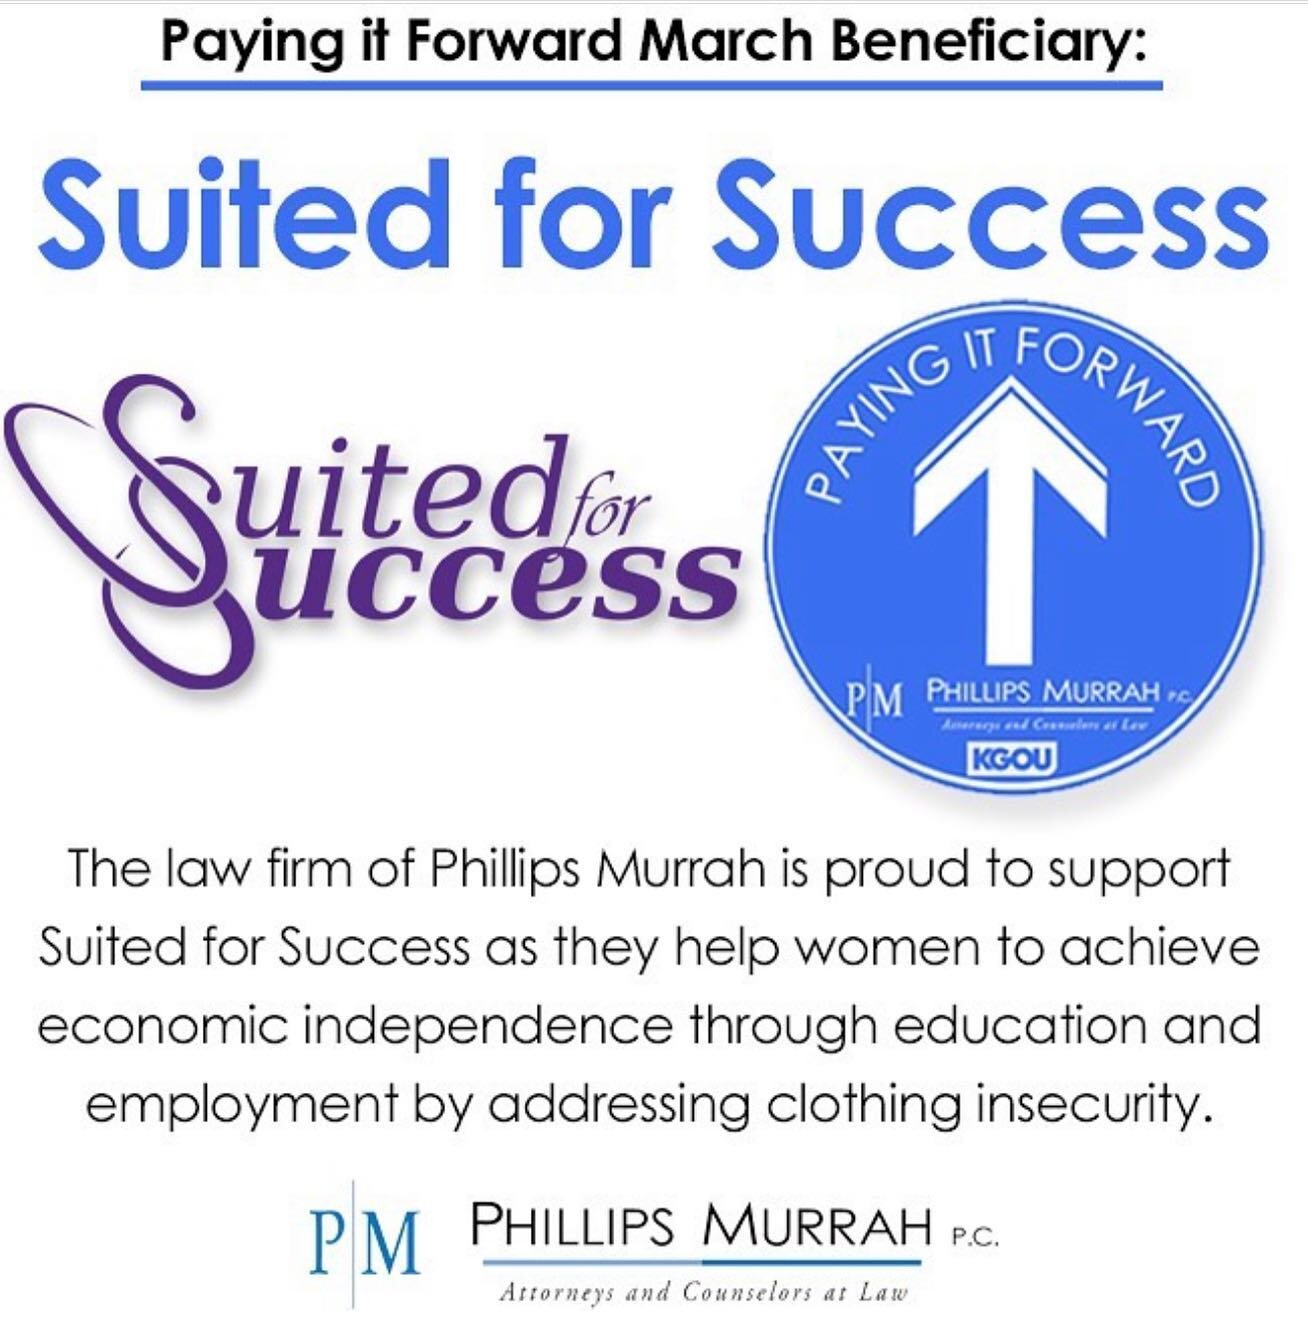 So excited to partner with @phillipsmurrah in supporting the Suited mission! Thank you for your support!!